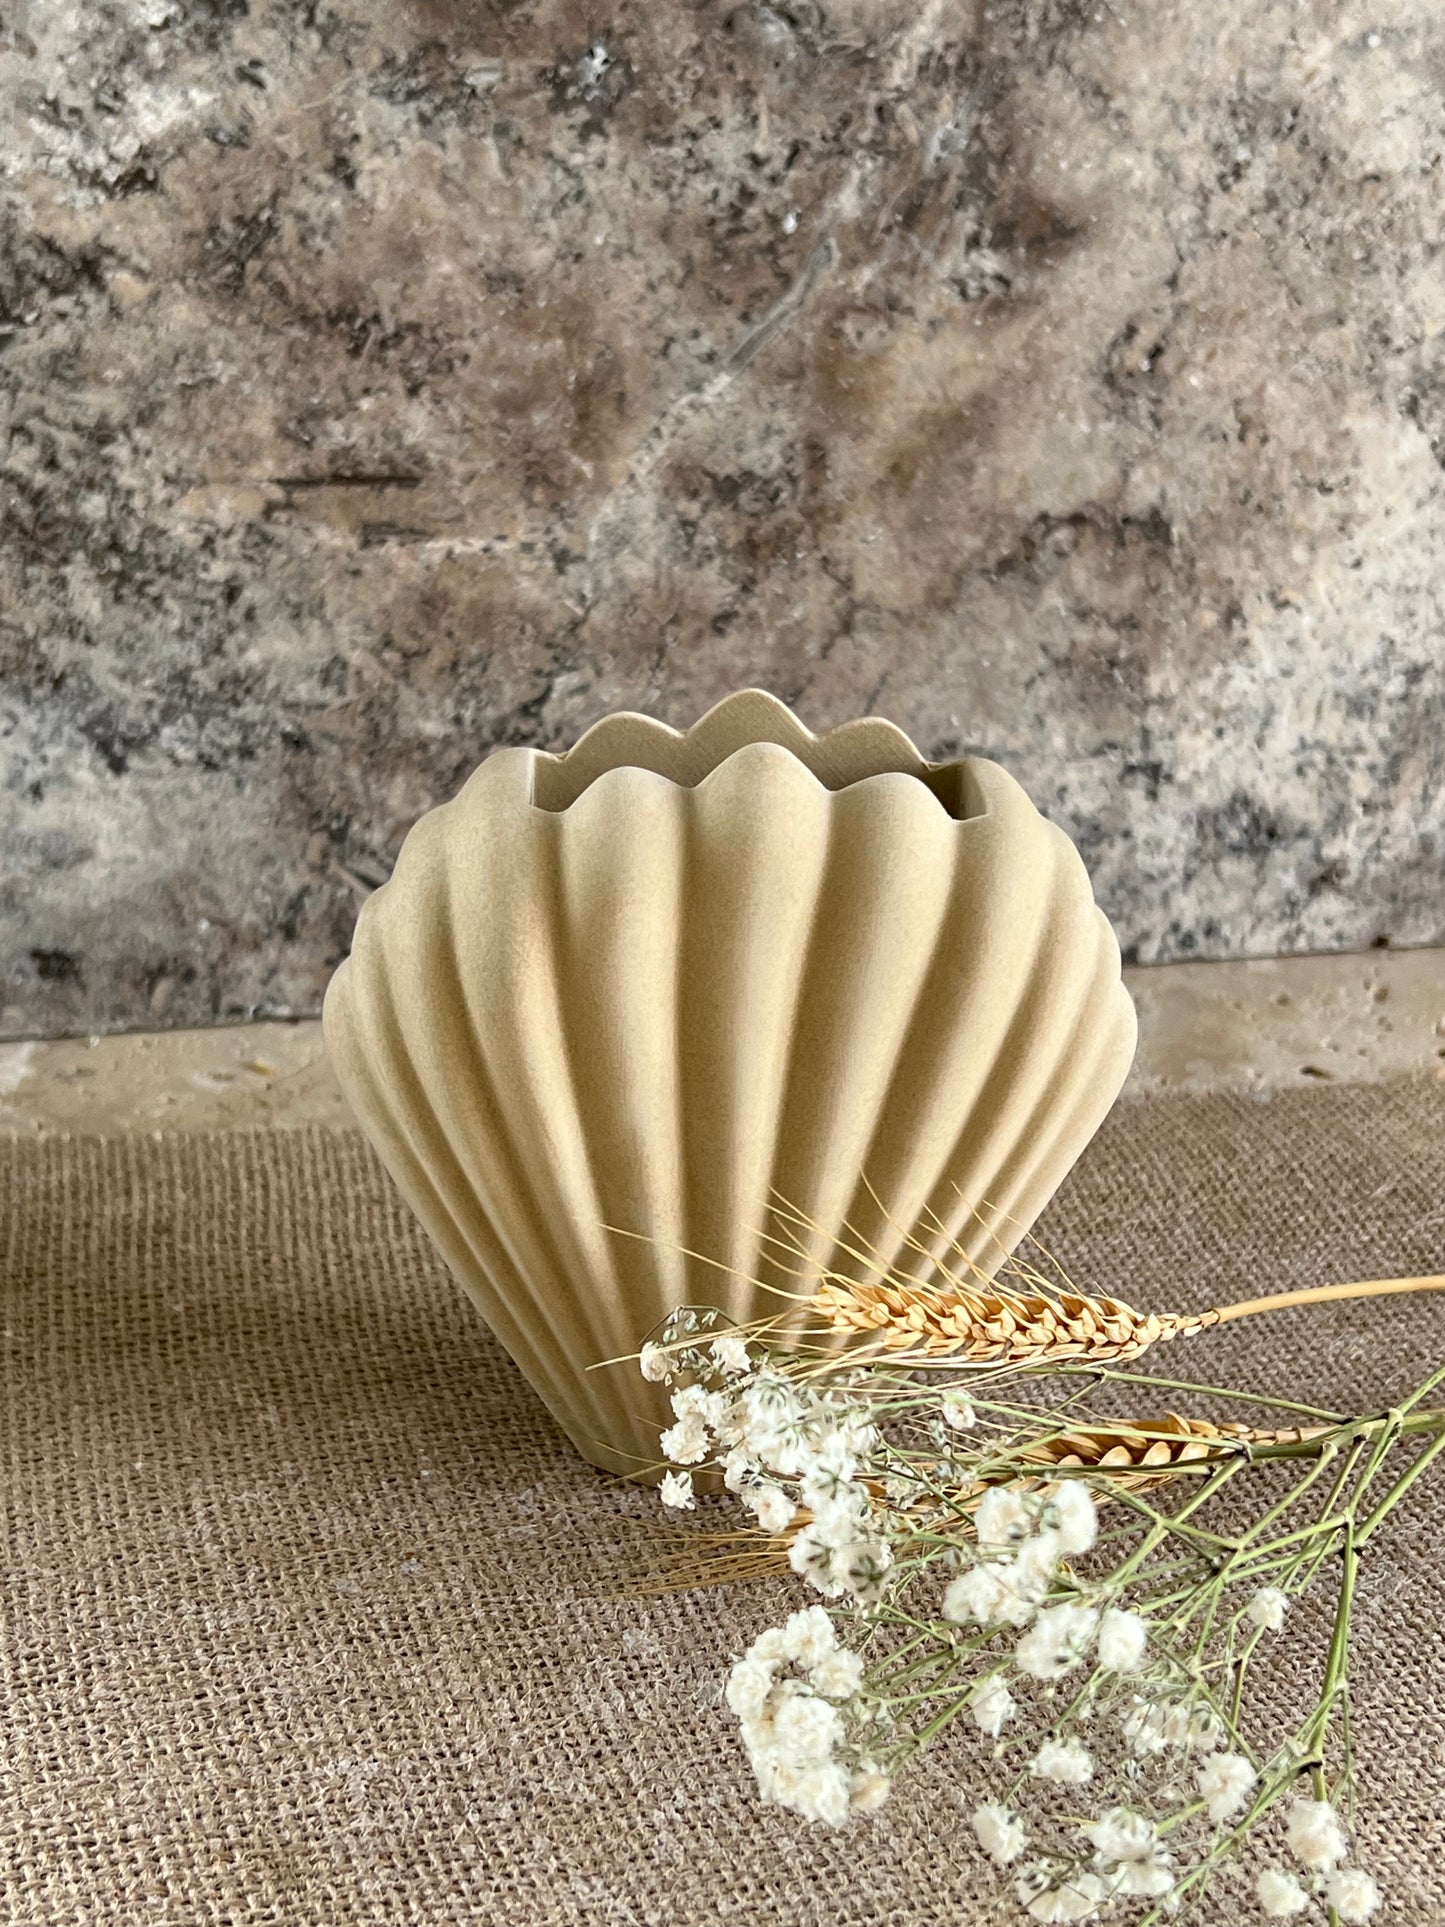 Clam Shell Vase